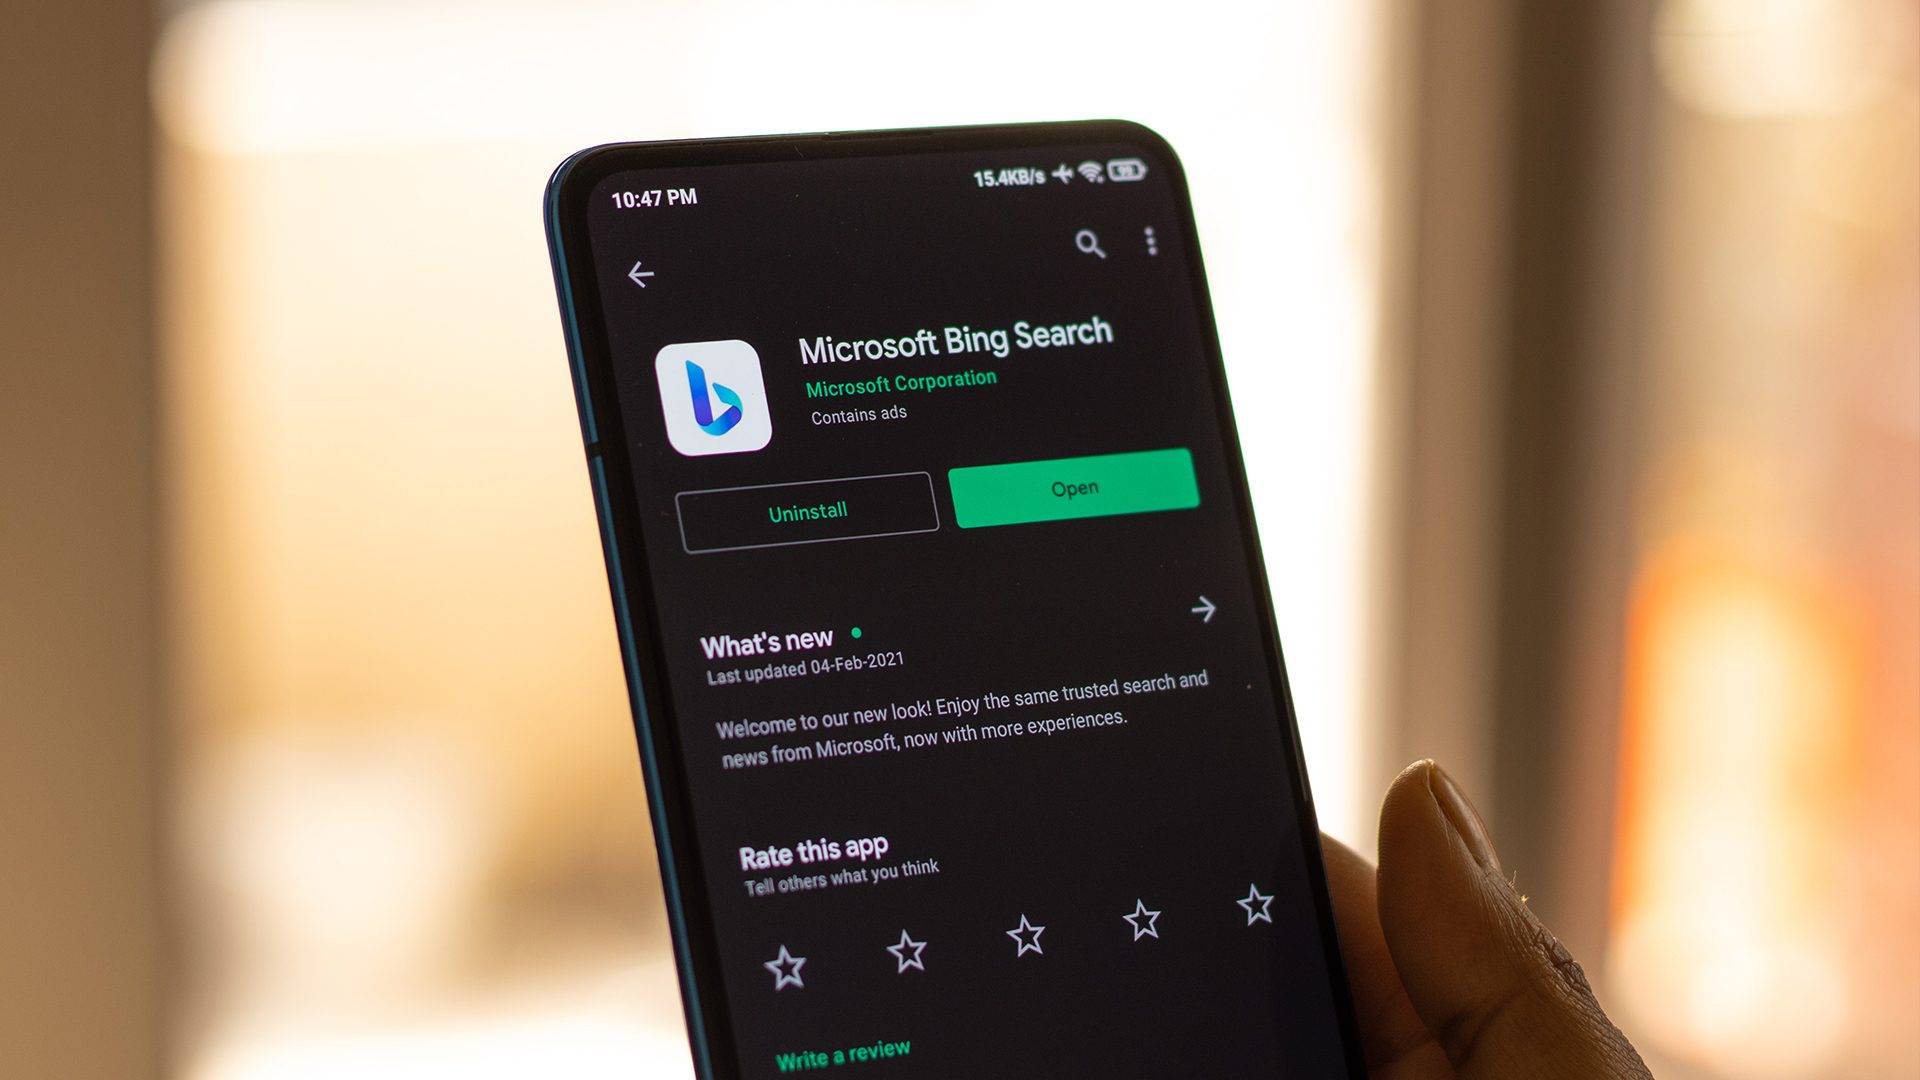 China requires Microsoft’s Bing to suspend auto-suggest feature